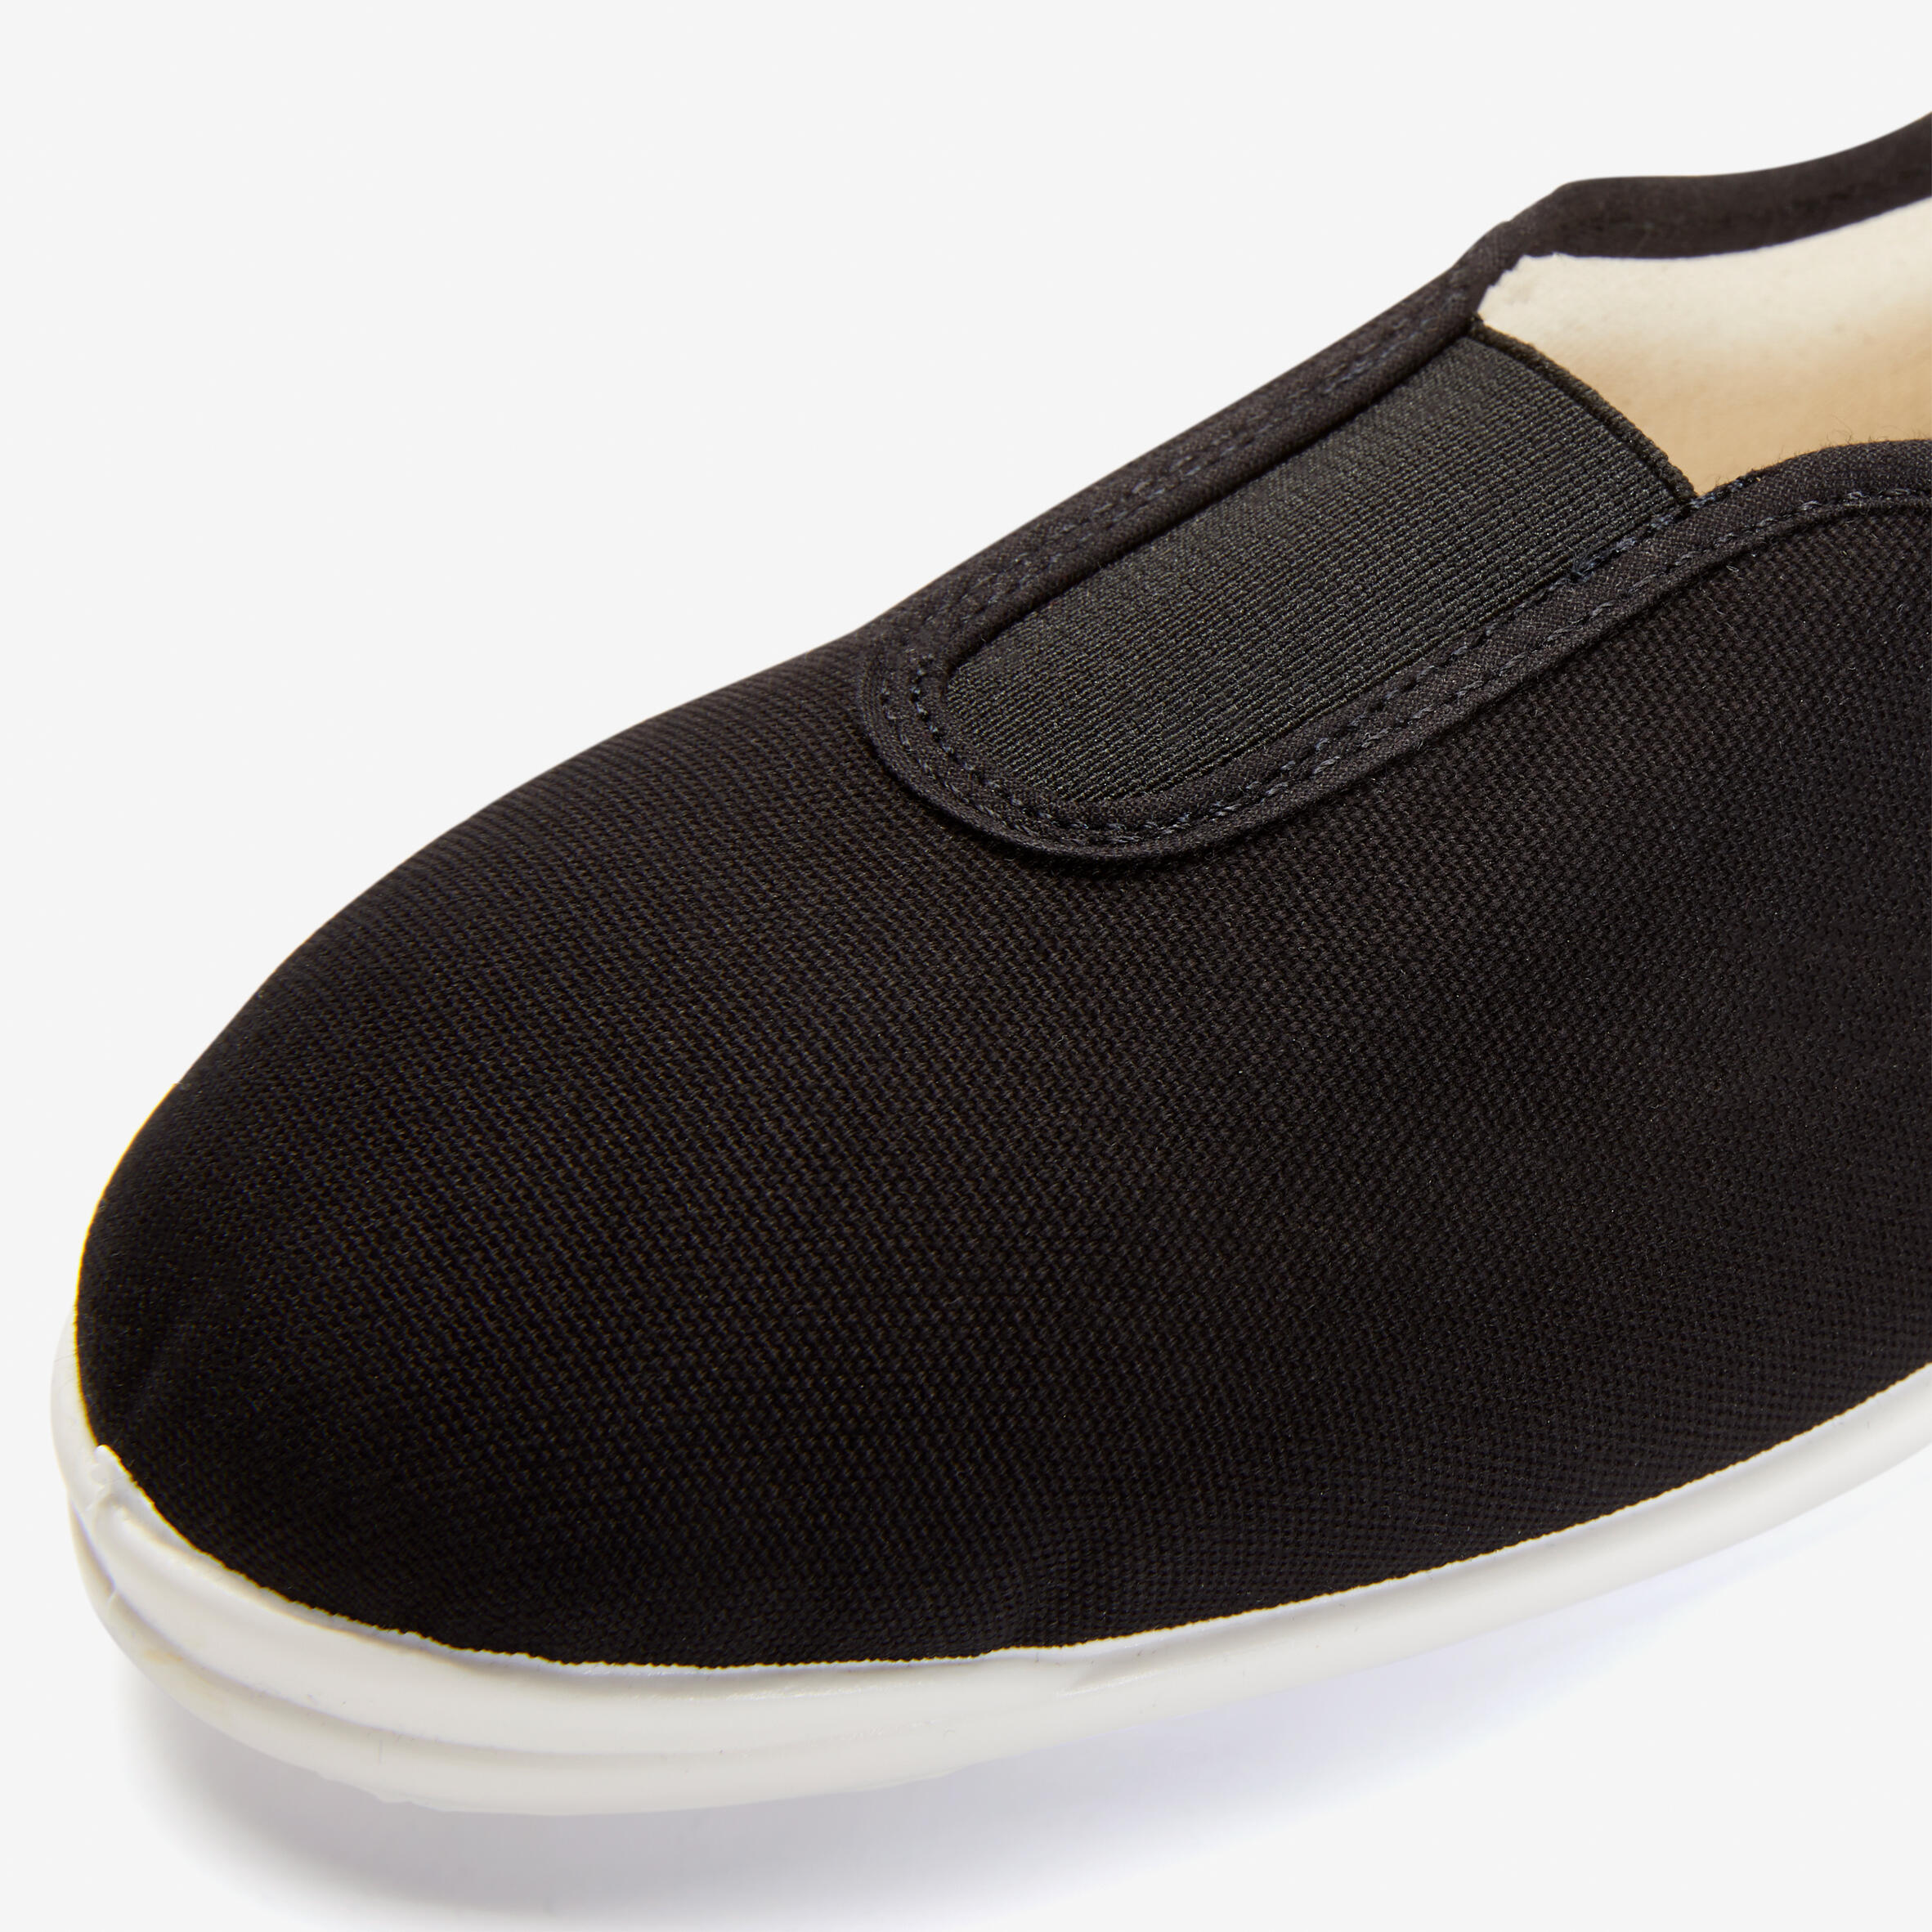 Adult Fabric Gym Shoes - Black 3/5